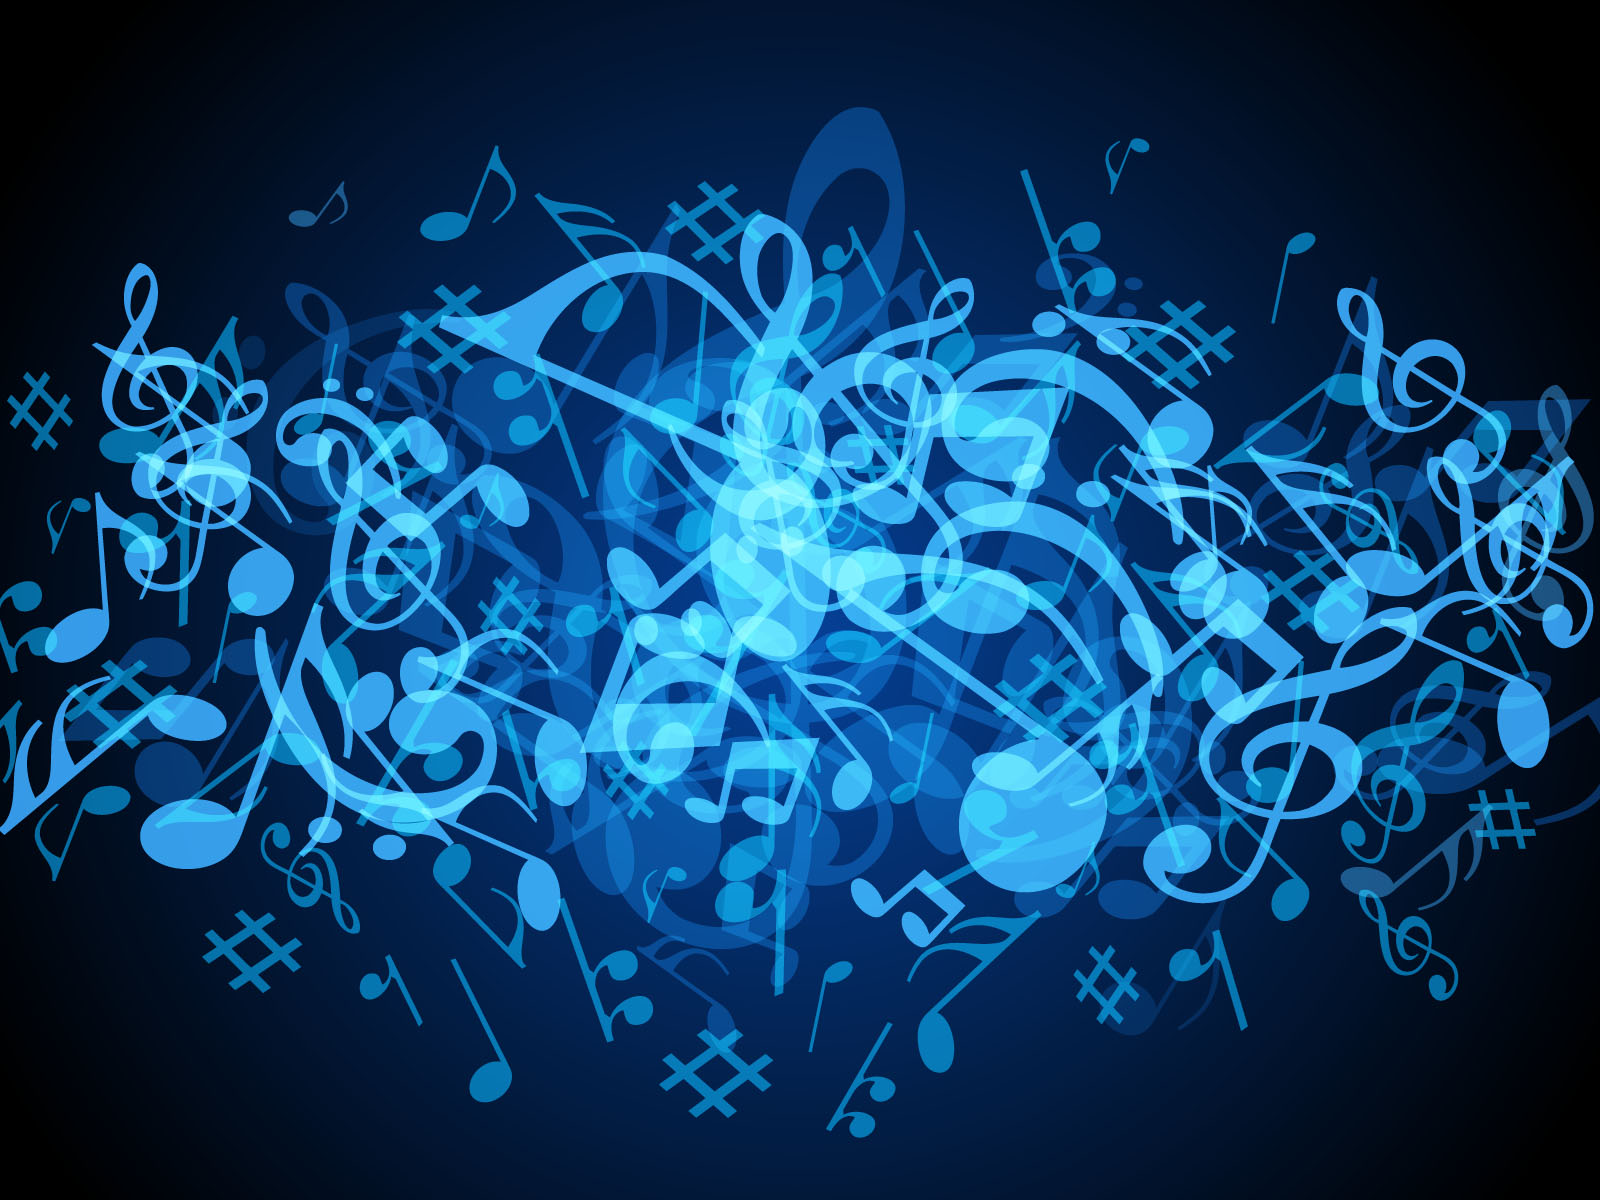 Music Notes  High Definition High Quality Widescreen Presentation PPT Backgrounds